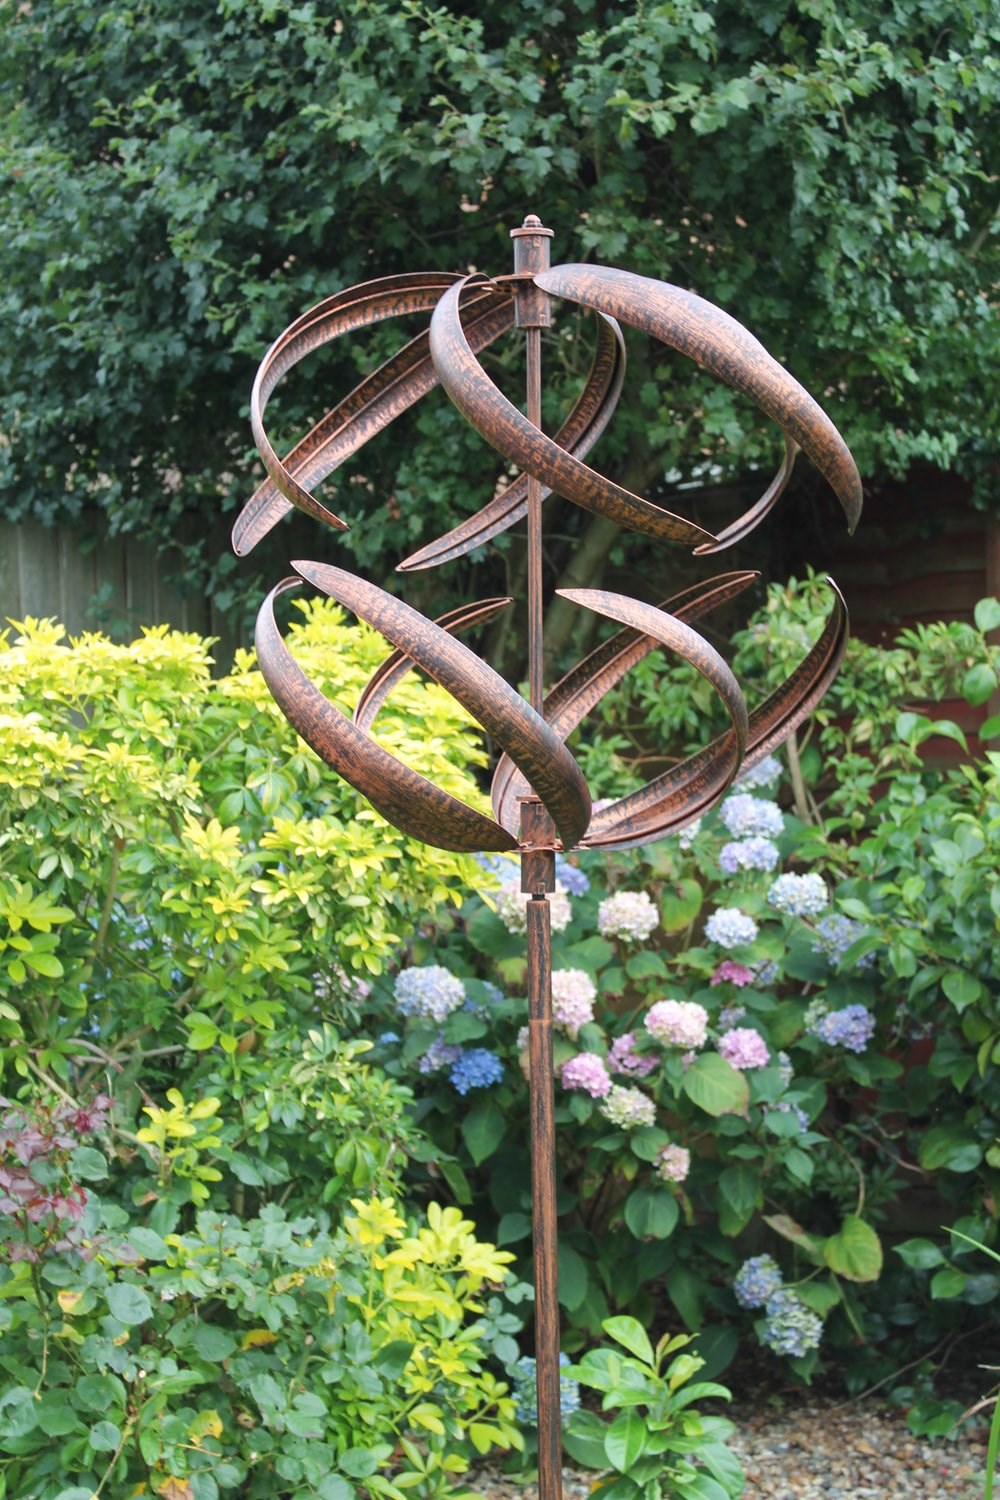 Brushed Copper Sphere Wind Spinner Dia 56cm By Creekwood™